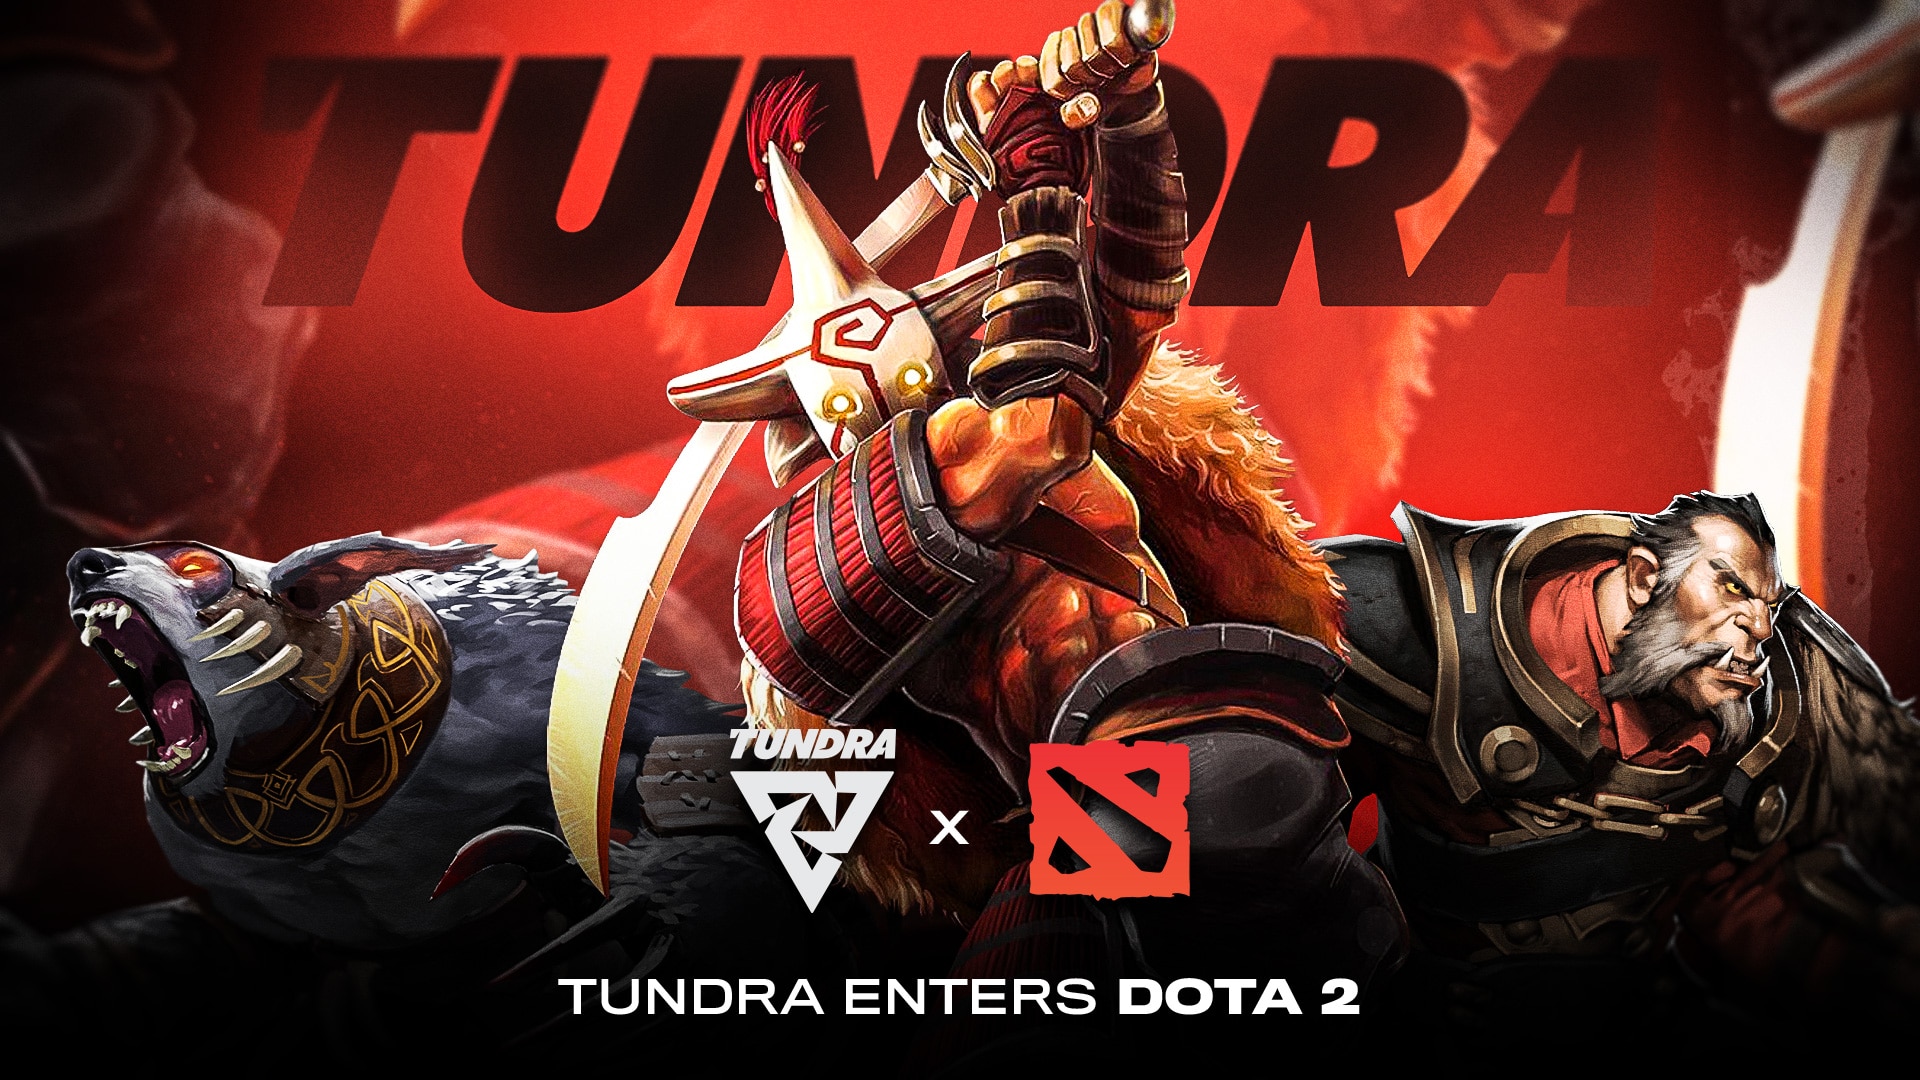 UKbased org Tundra move into Dota 2 after signing team taking part in